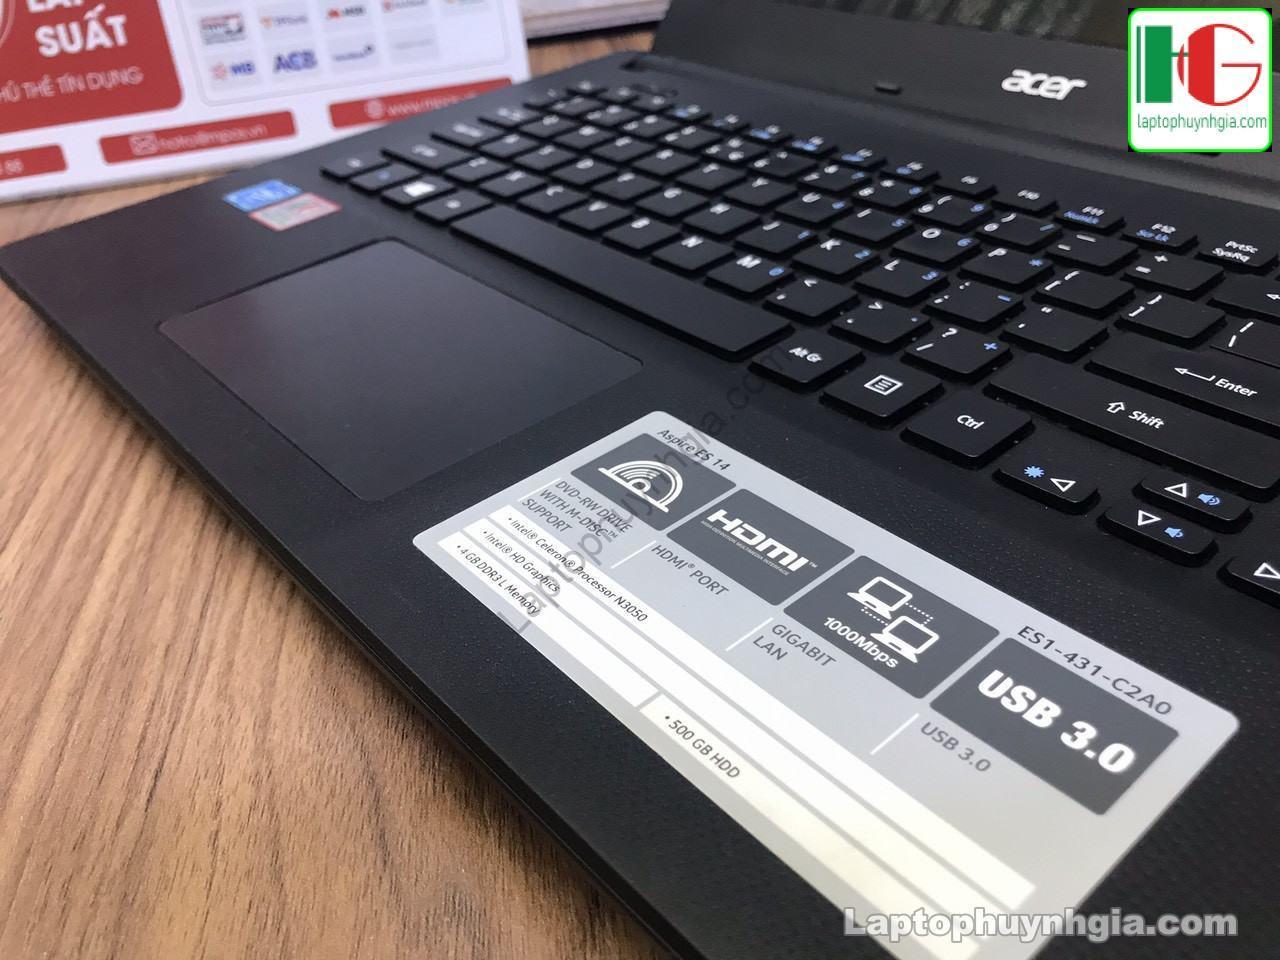 Acer Es1 N3060 4g 500g Lcd 14 Laptopcubinhduong.vn 1